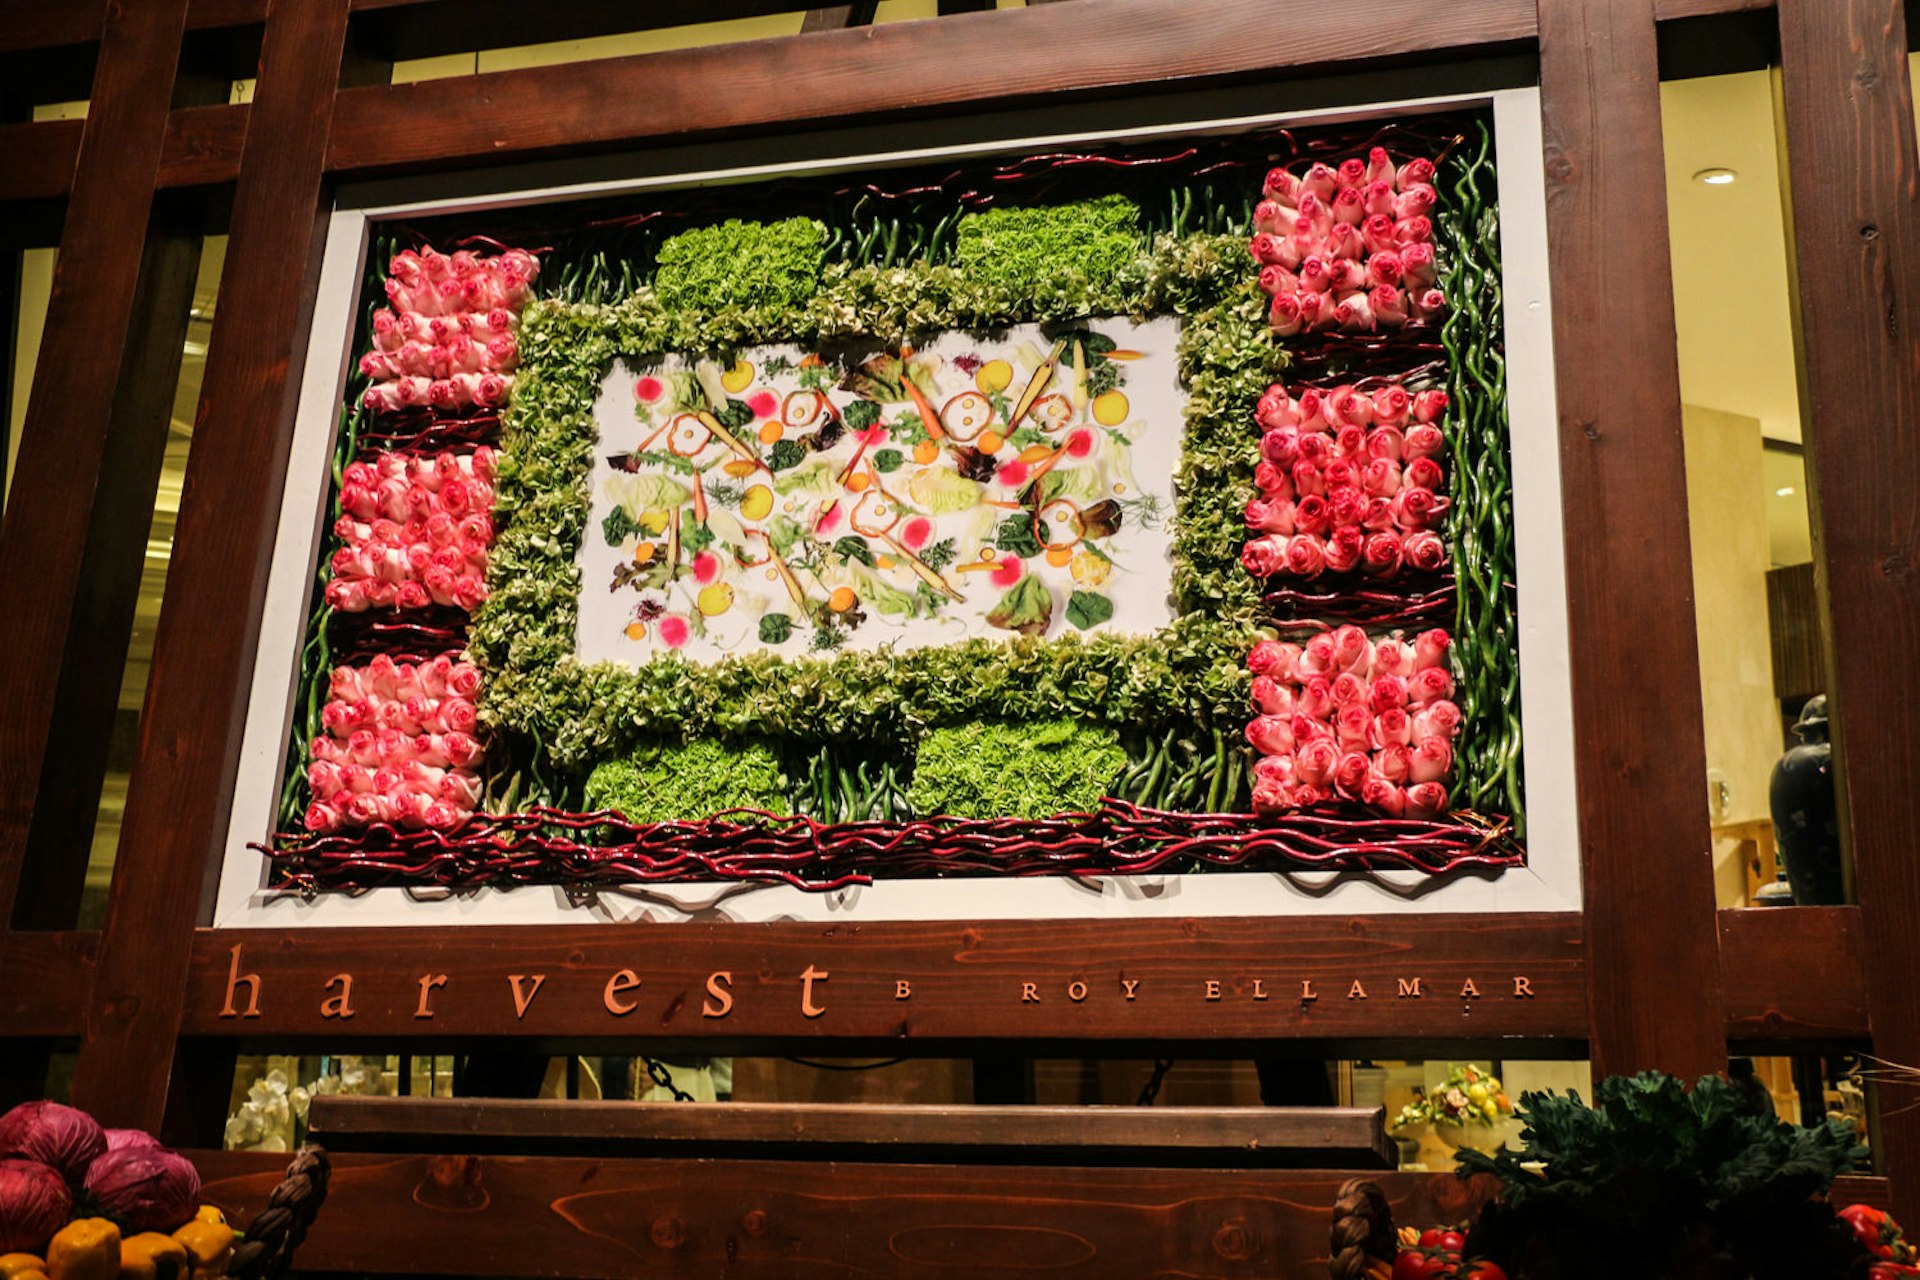 A sign incorporating fresh produce at Harvest by Roy Ellamar at the Bellagio © Greg Thilmont / Lonely Planet